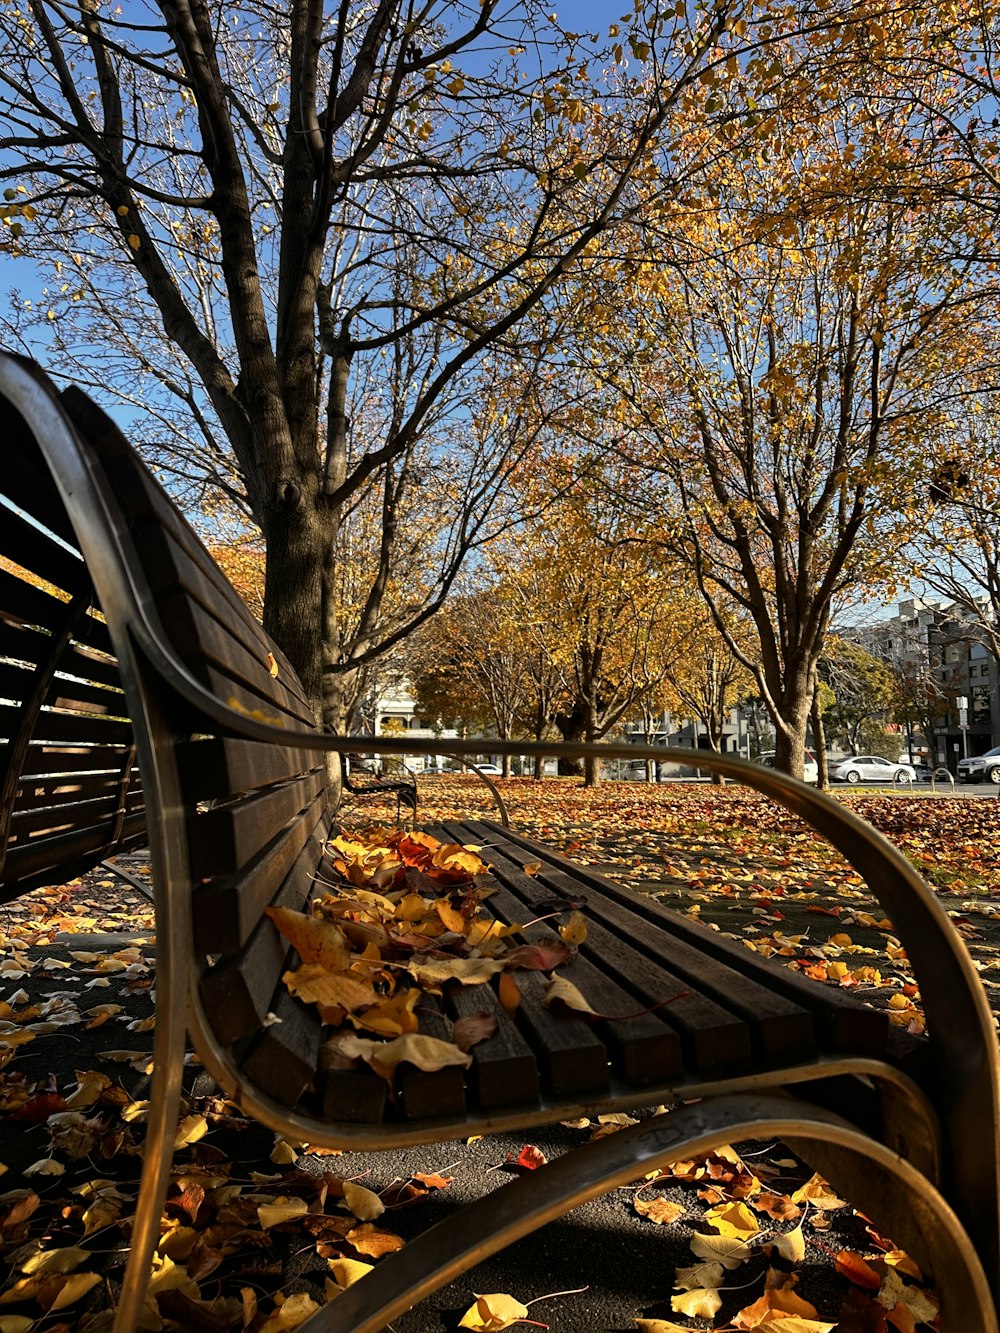 a park bench with fallen leaves on the ground